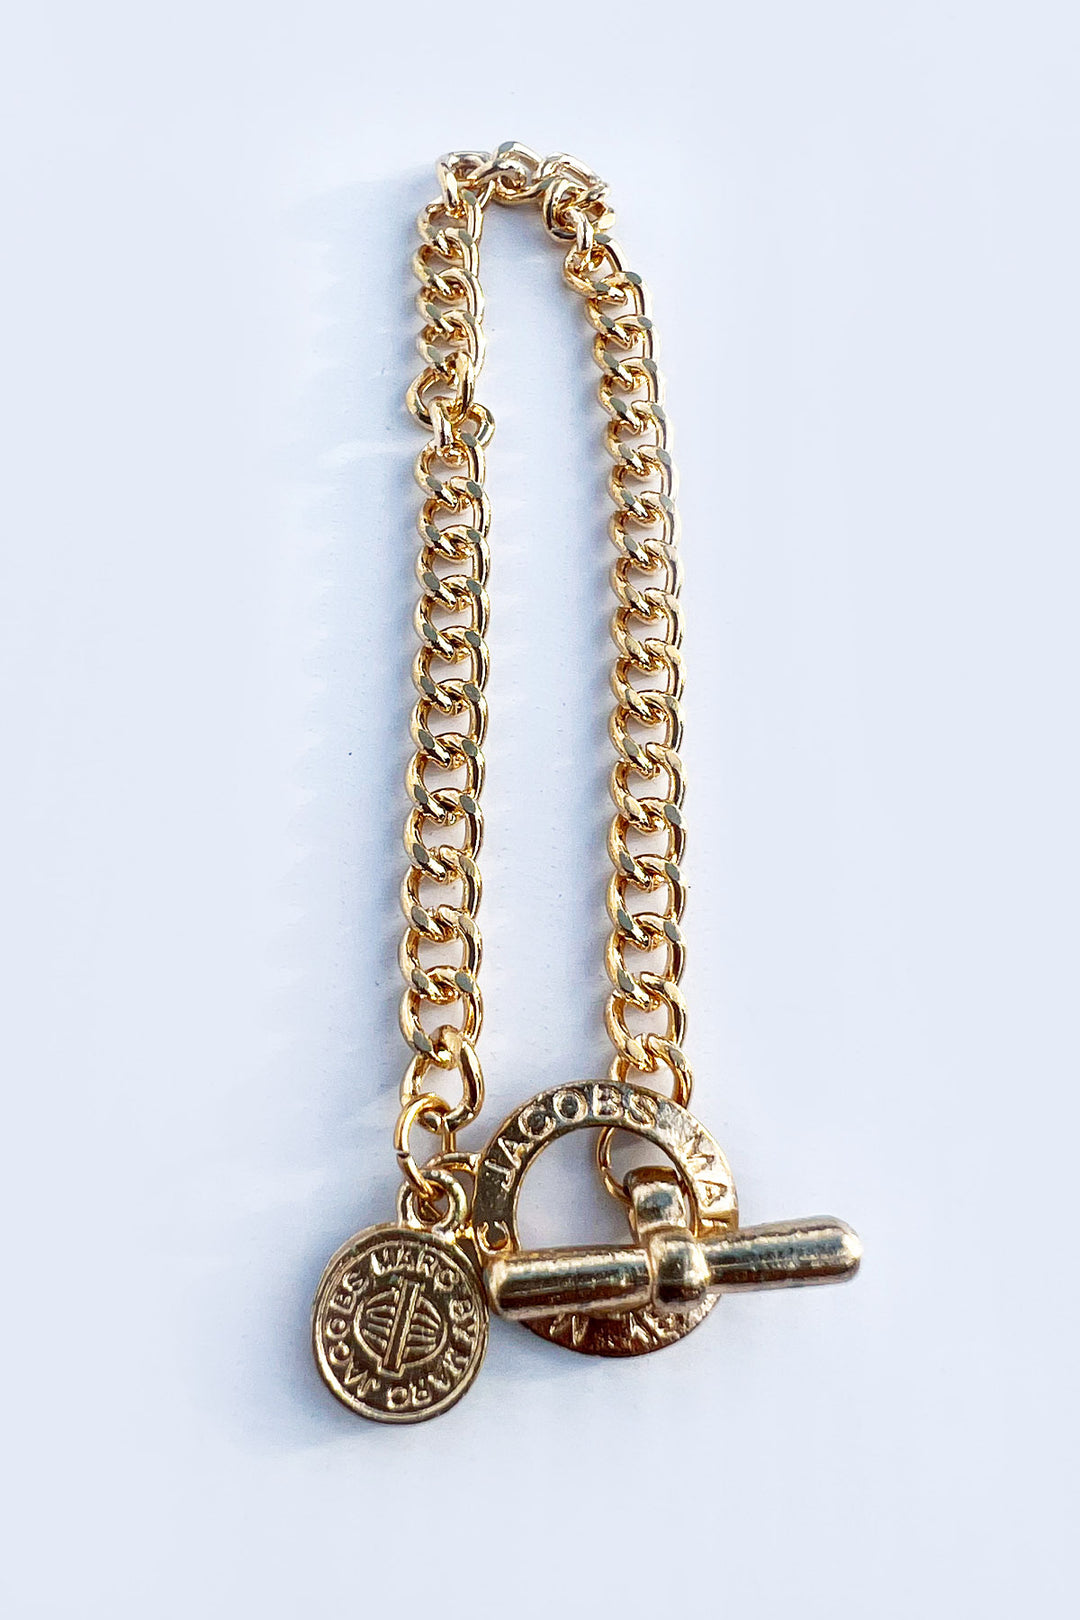 Albert Chain with T Bar and Fob - S23 - WJW0078